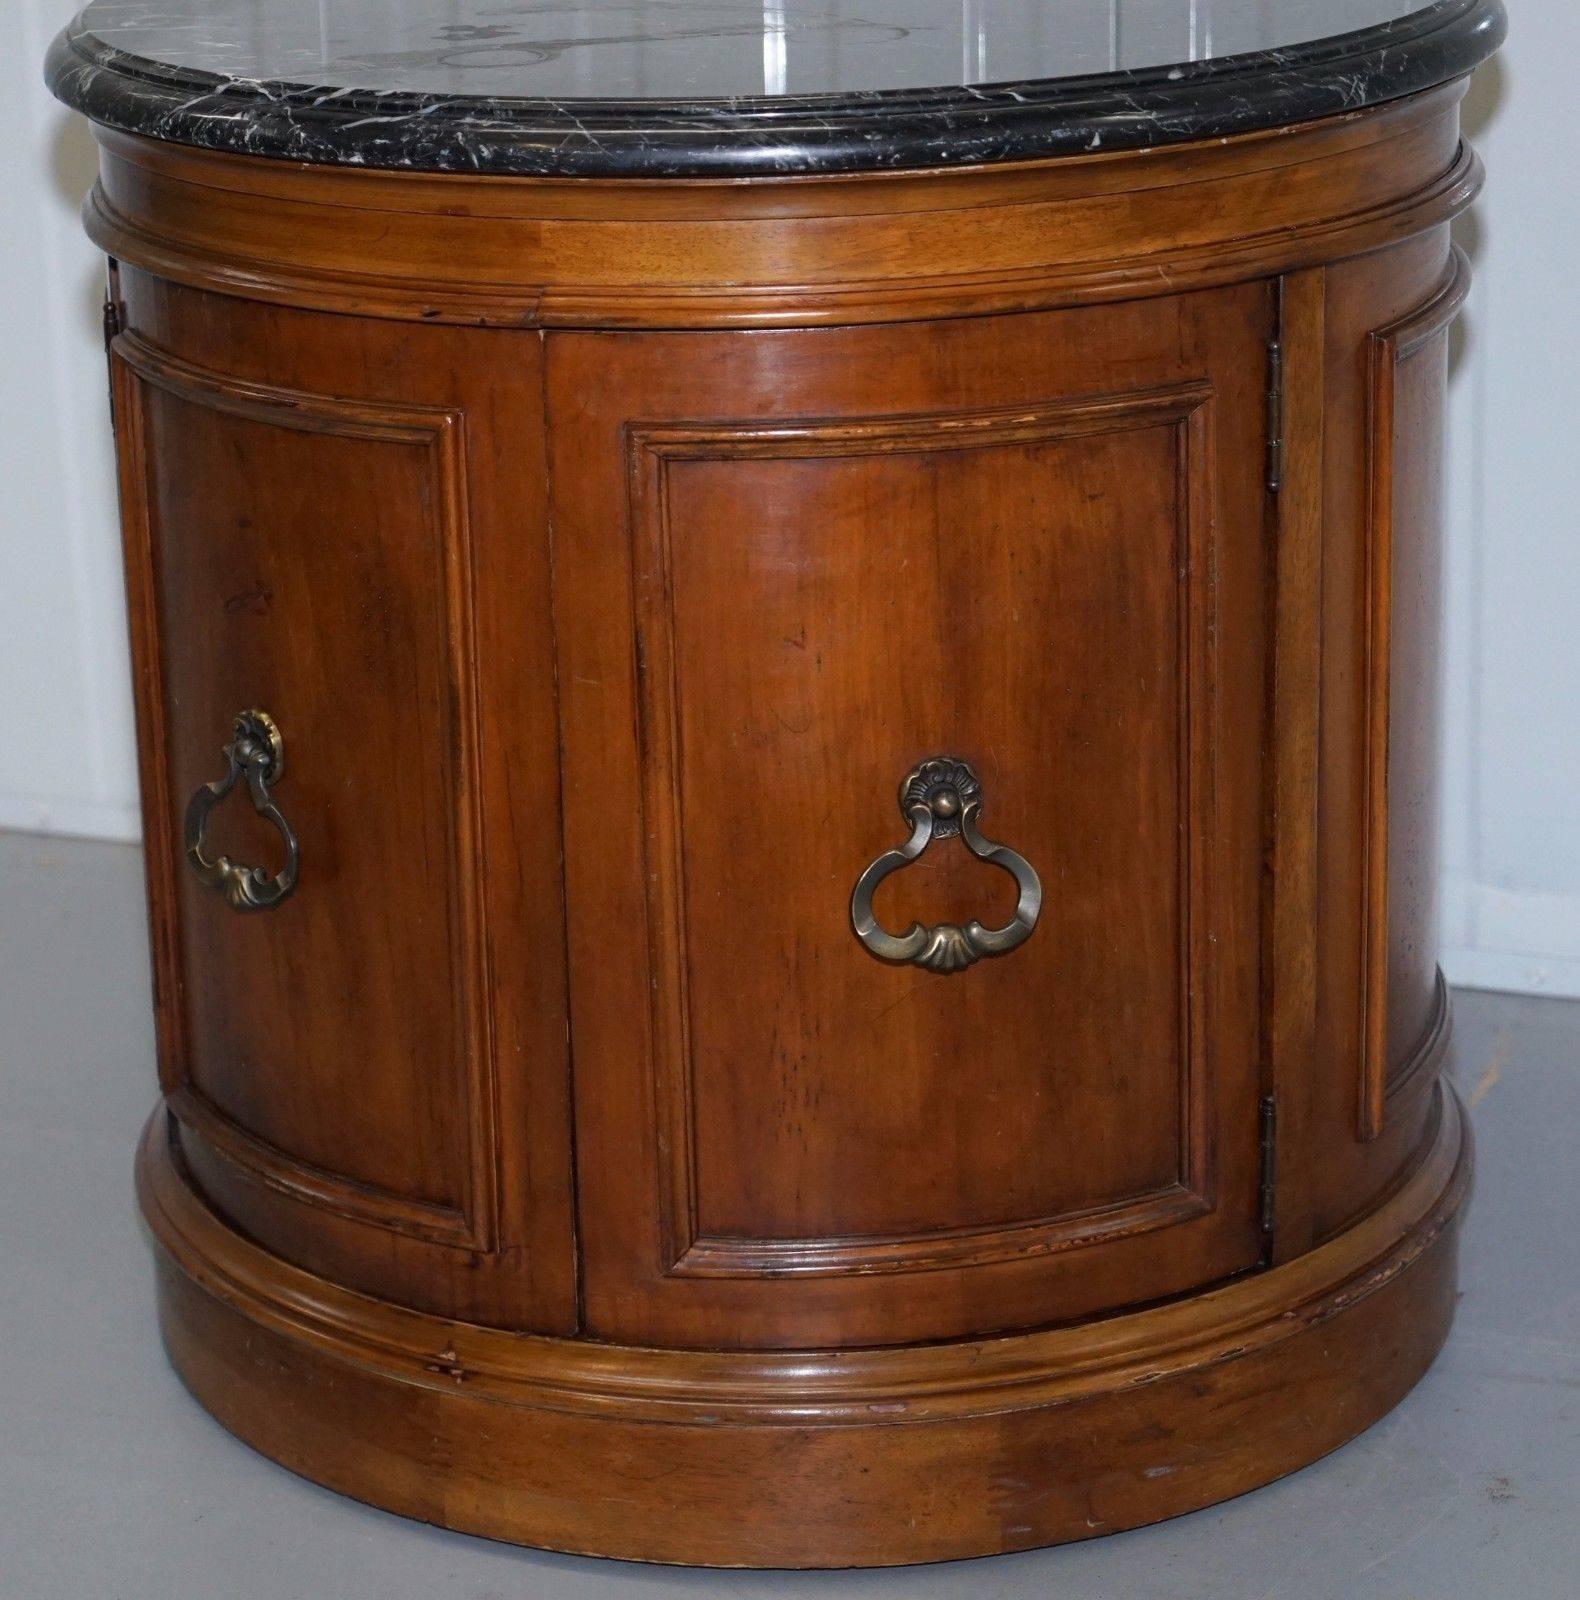 British Regency Style Round Mahogany Marble Topped Large Drum Side Occasional Lamp Table